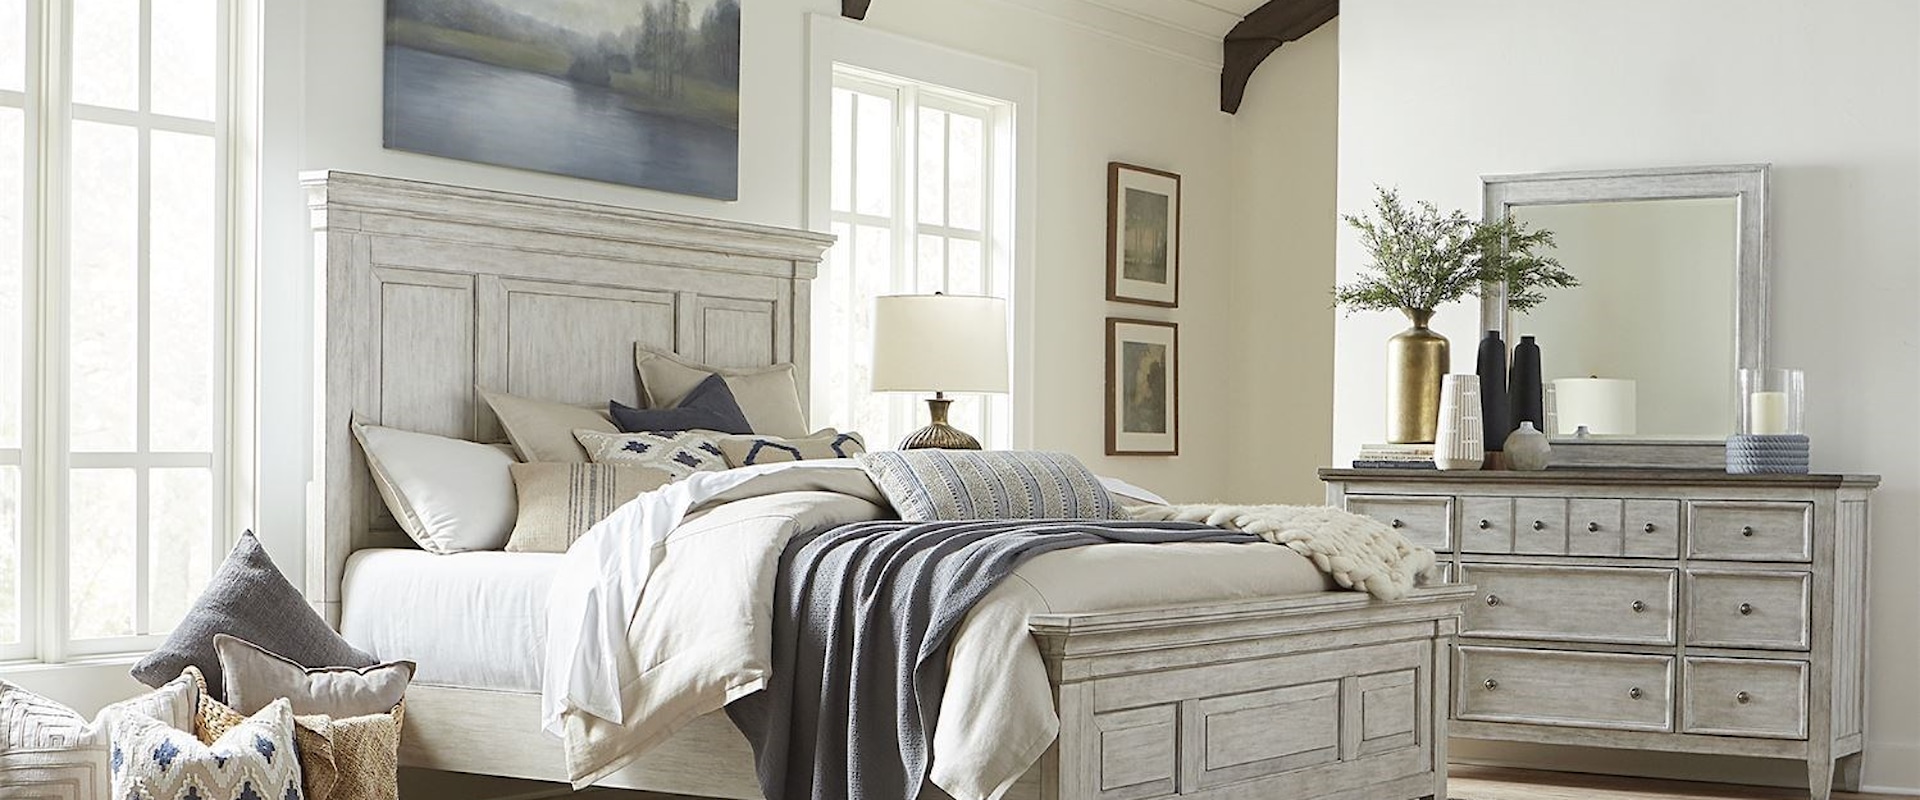 Farmhouse 3-Piece Queen Panel Bedroom Group with Felt-Lined Drawers